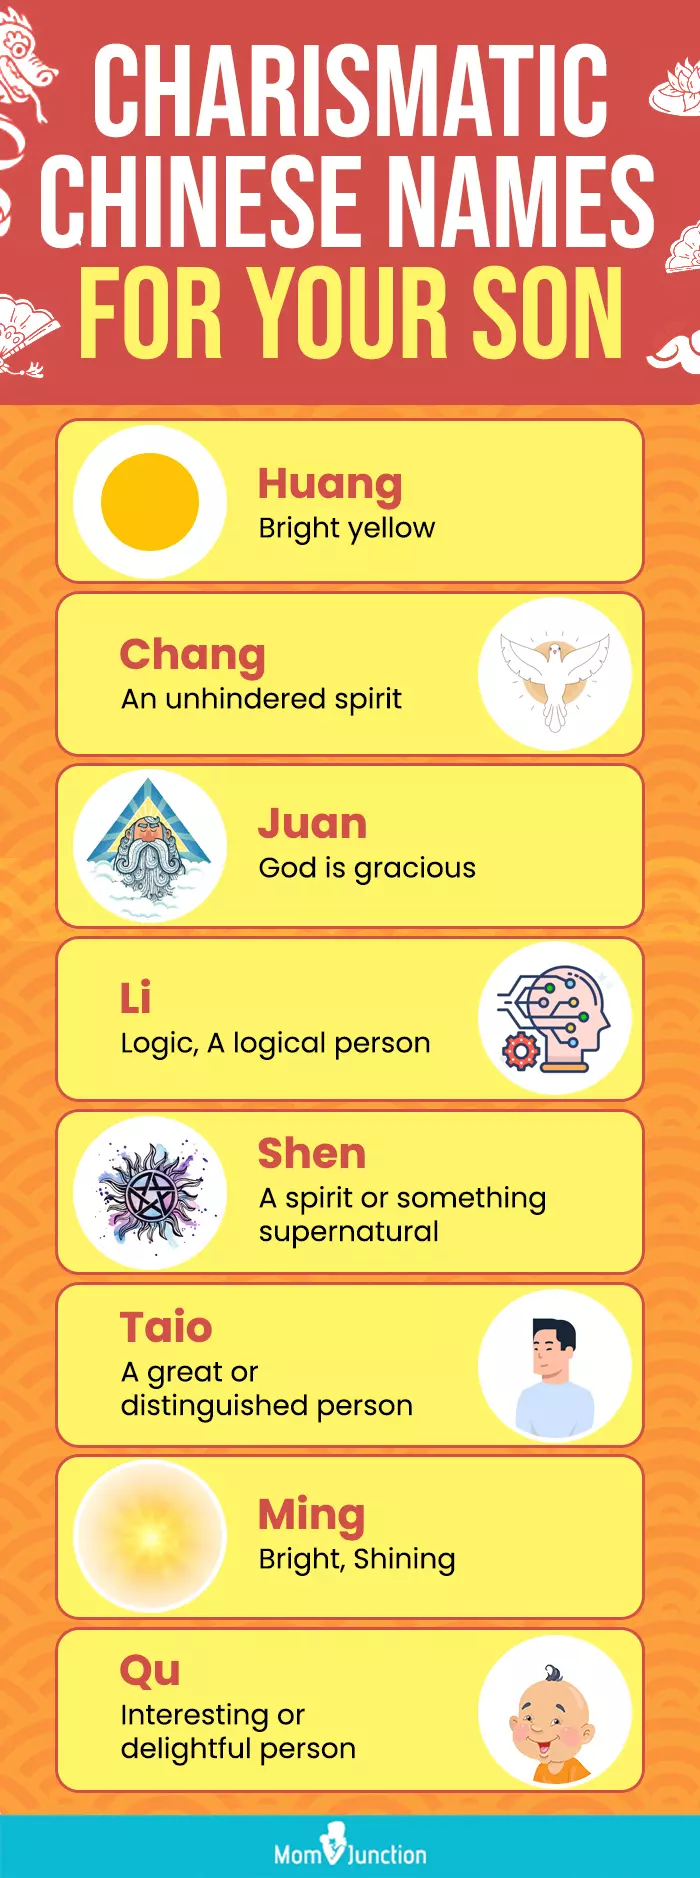 charismatic chinese names for your son (infographic)